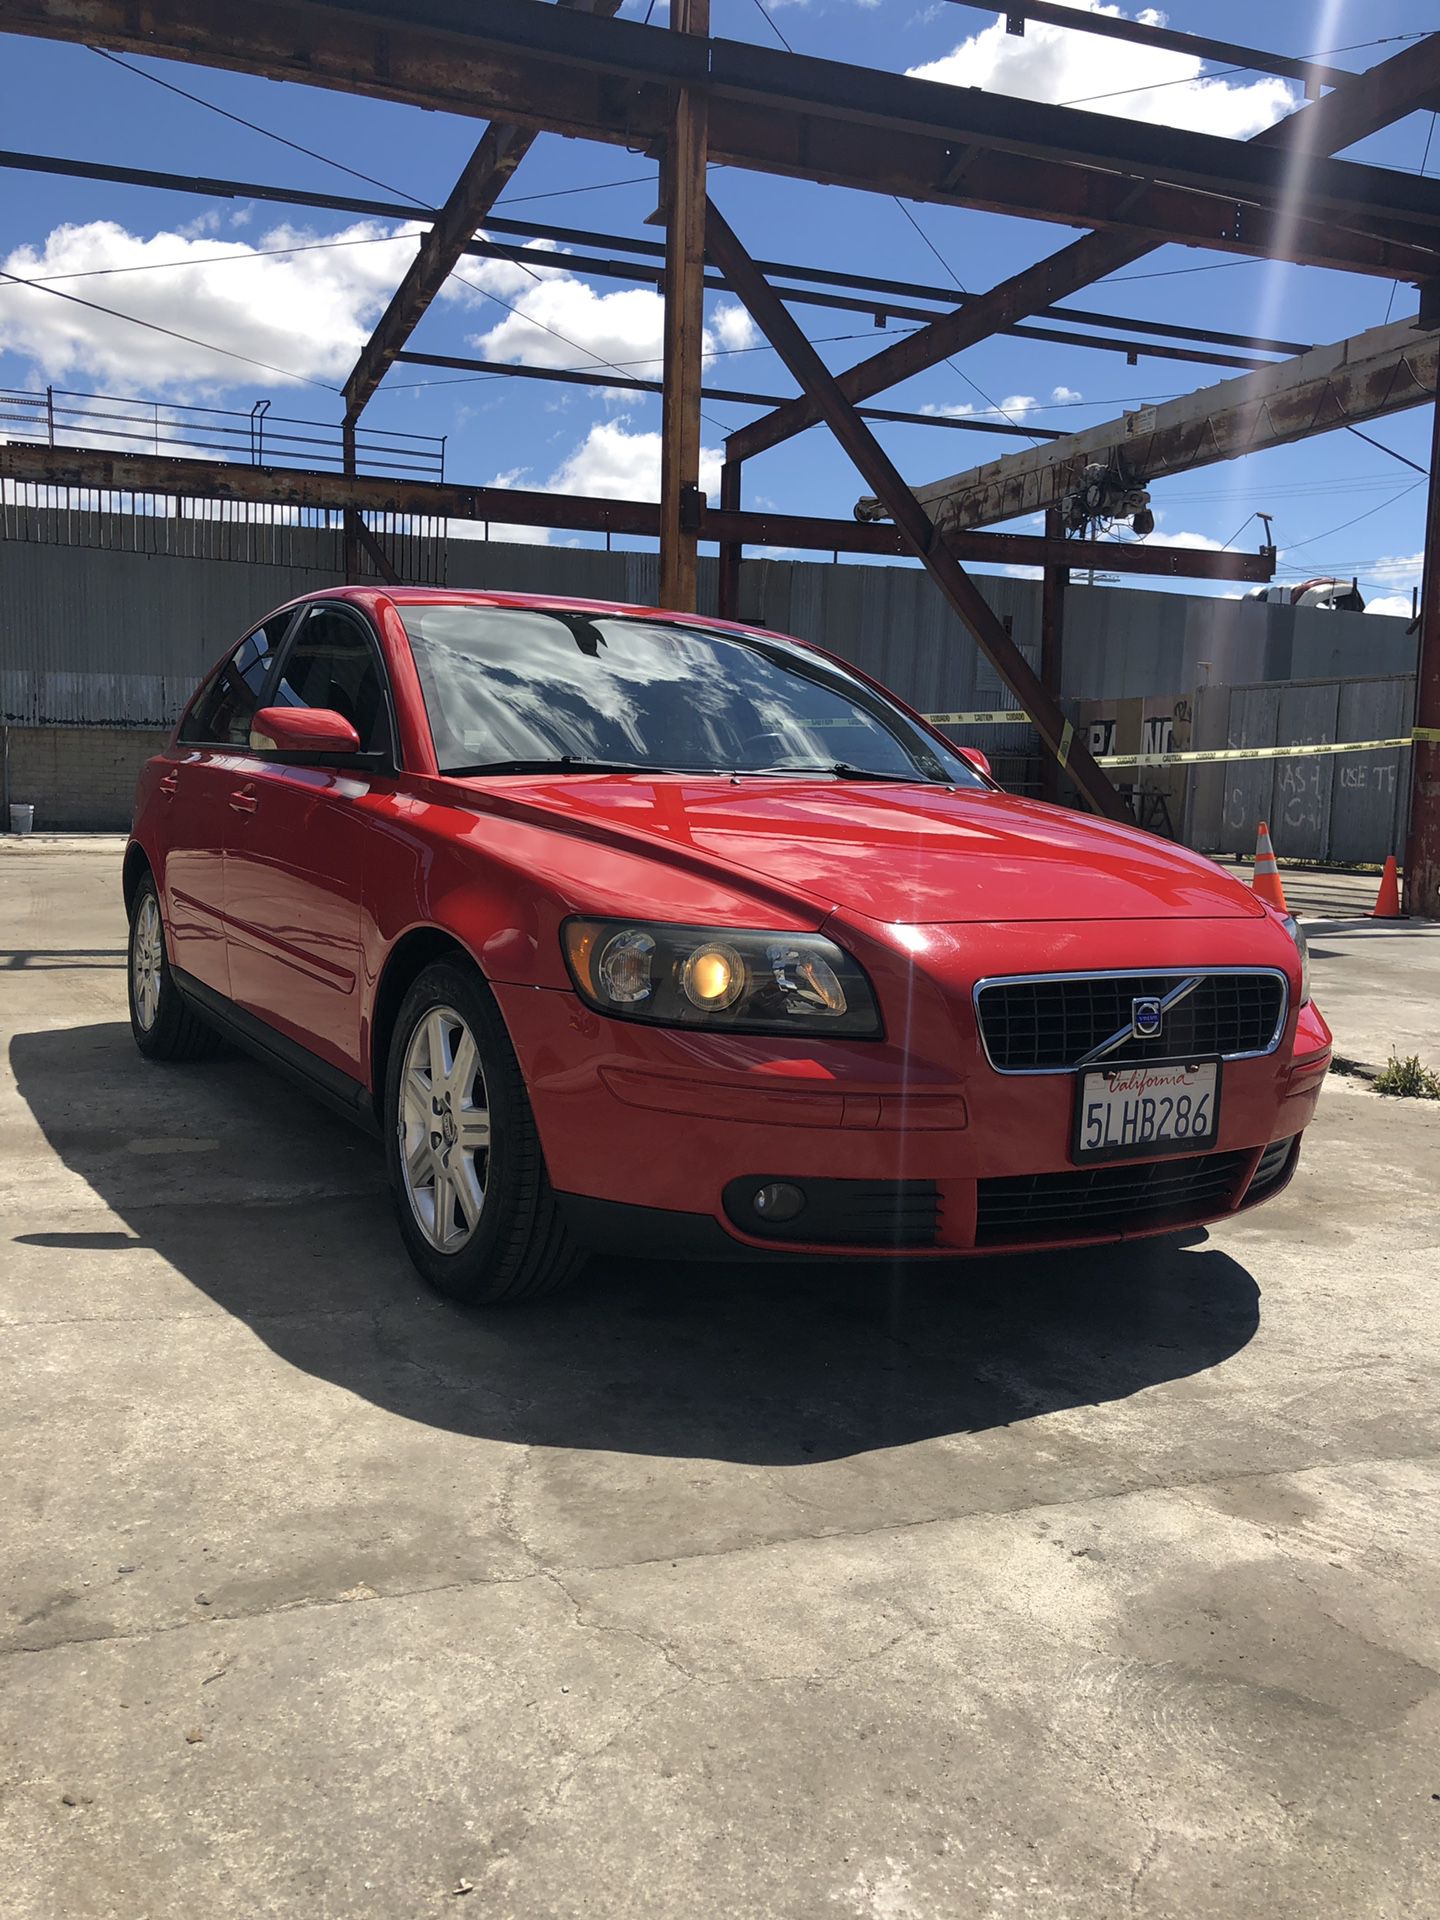 plantageejer Udvidelse partner BEAUTIFUL CHERRY RED 2005 VOLVO S40 T5! CLEAN TITLE! 130k MILES! for Sale  in Los Angeles, CA - OfferUp